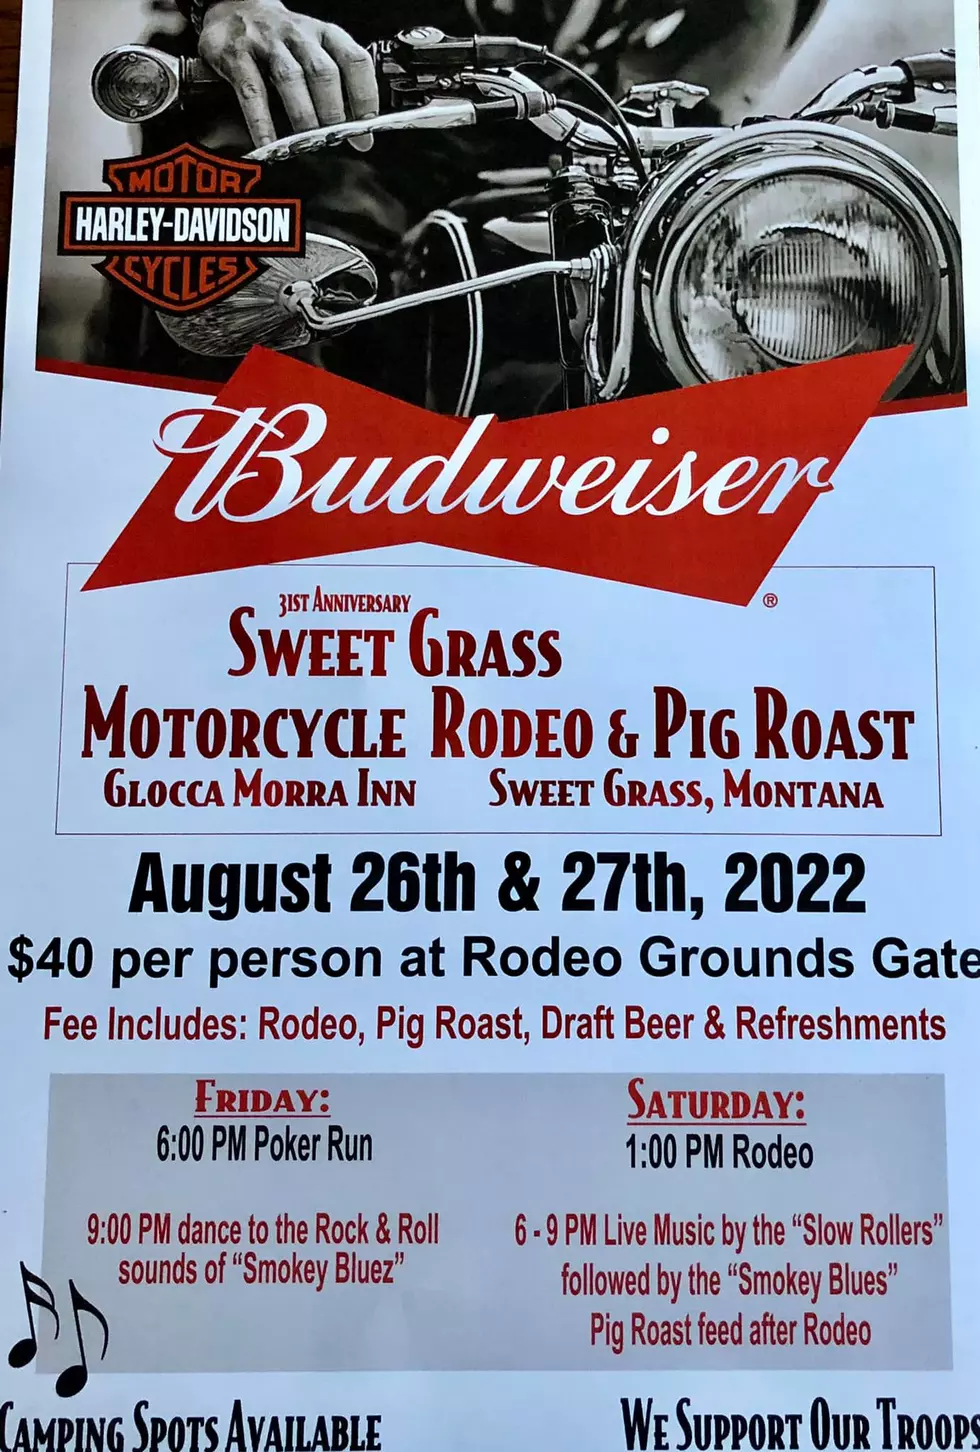 Sweet Grass Motorcycle Rodeo